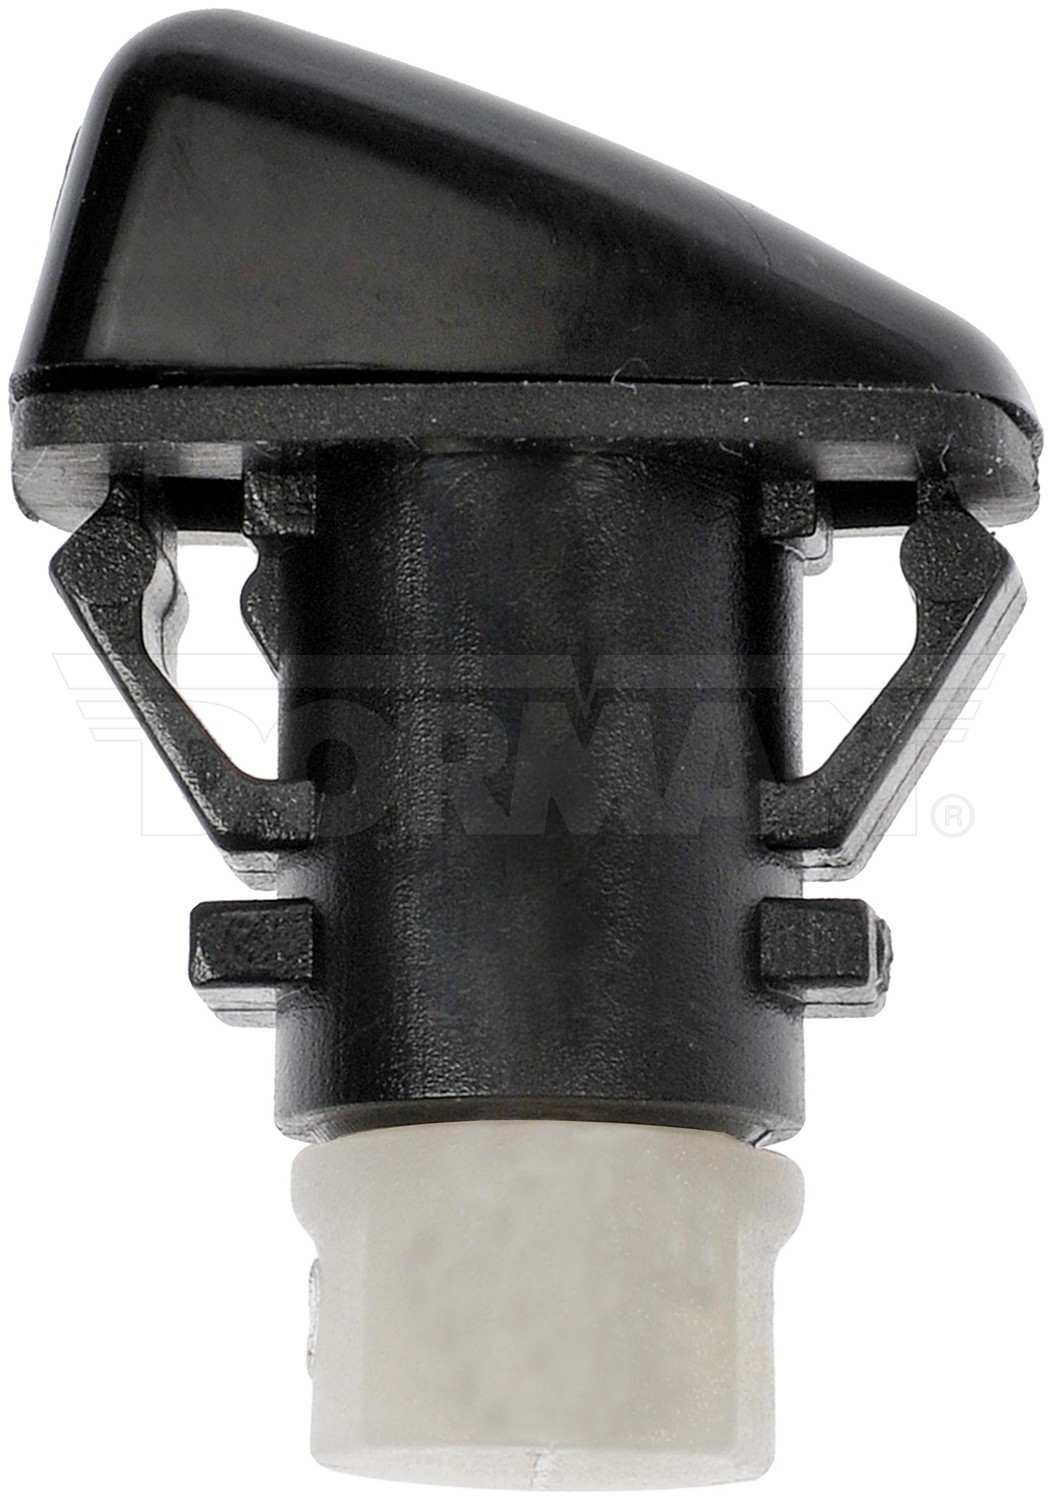 Bottom View of Left Windshield Washer Nozzle MOTORMITE 58132